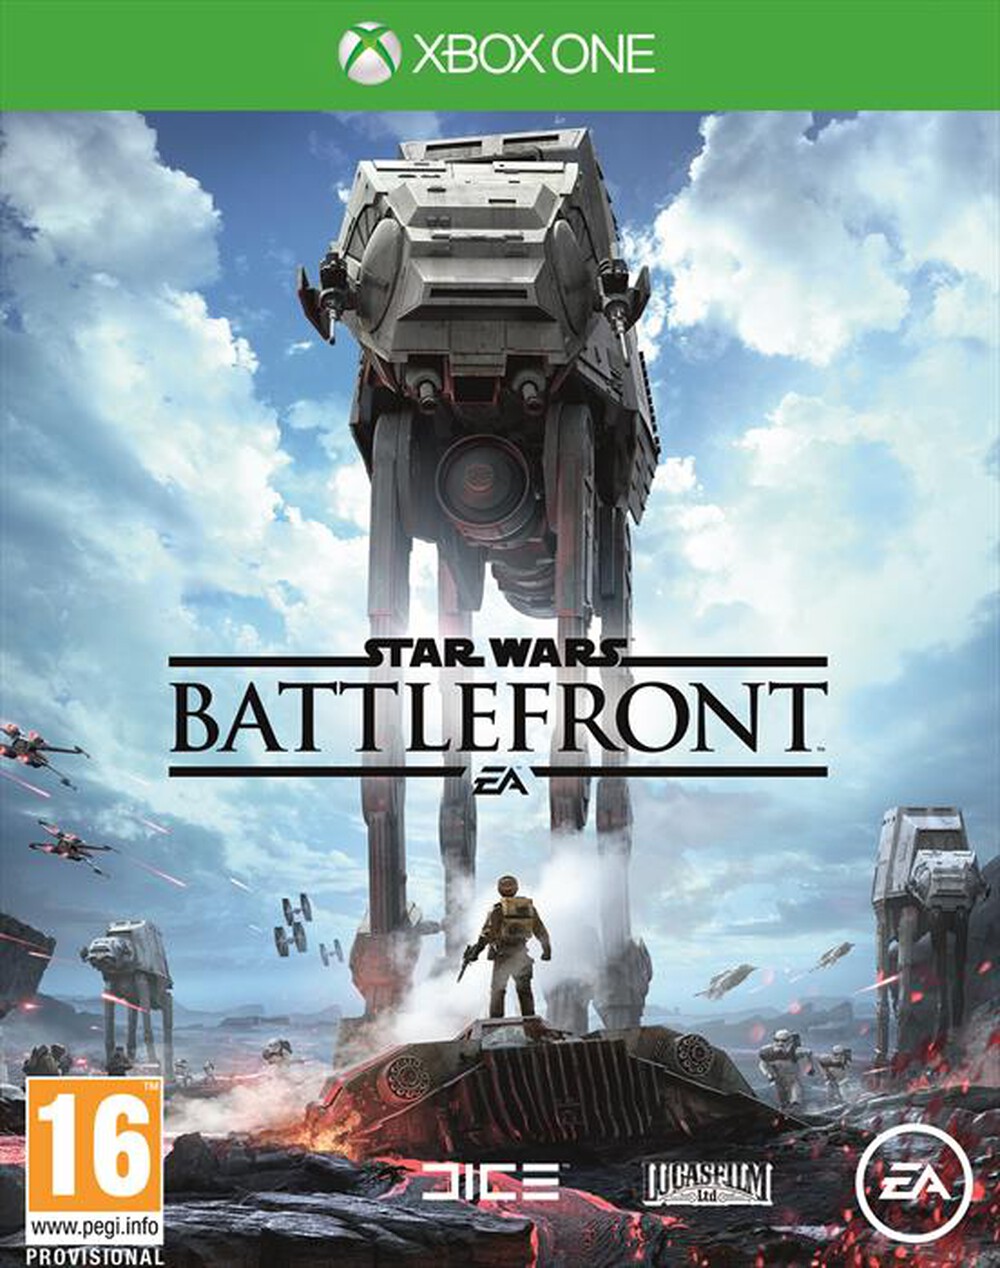 "ELECTRONIC ARTS - Star Wars: Battlefront Xbox One - "